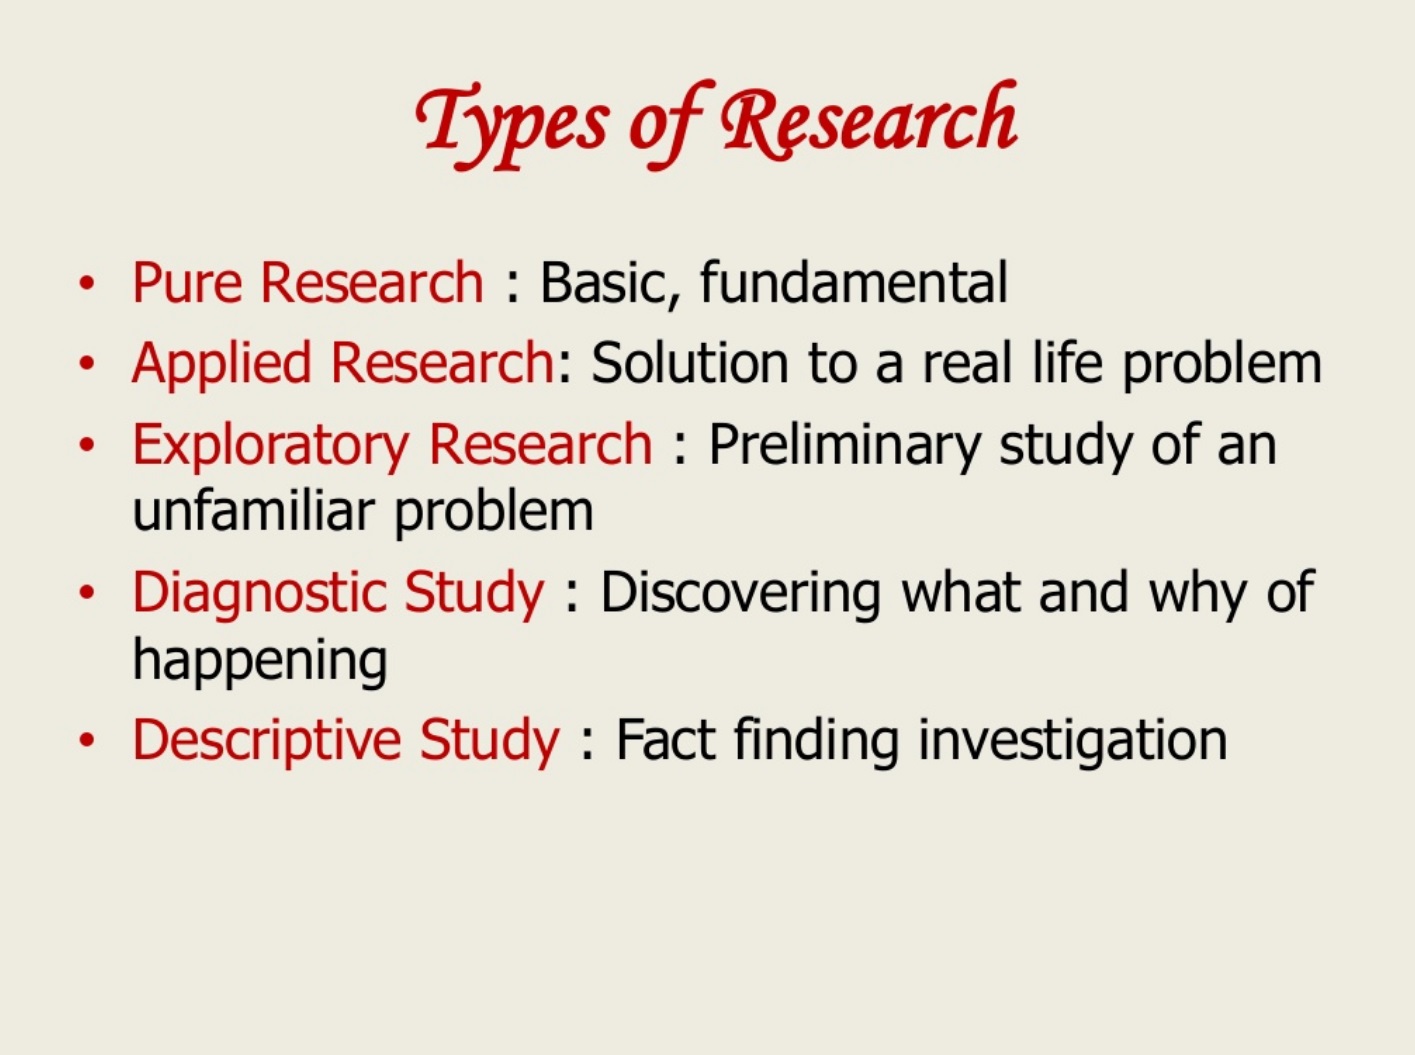 Fundamental paper education fandom. Types of research. Research methods. Exploratory research Types. Types of theses and dissertations.